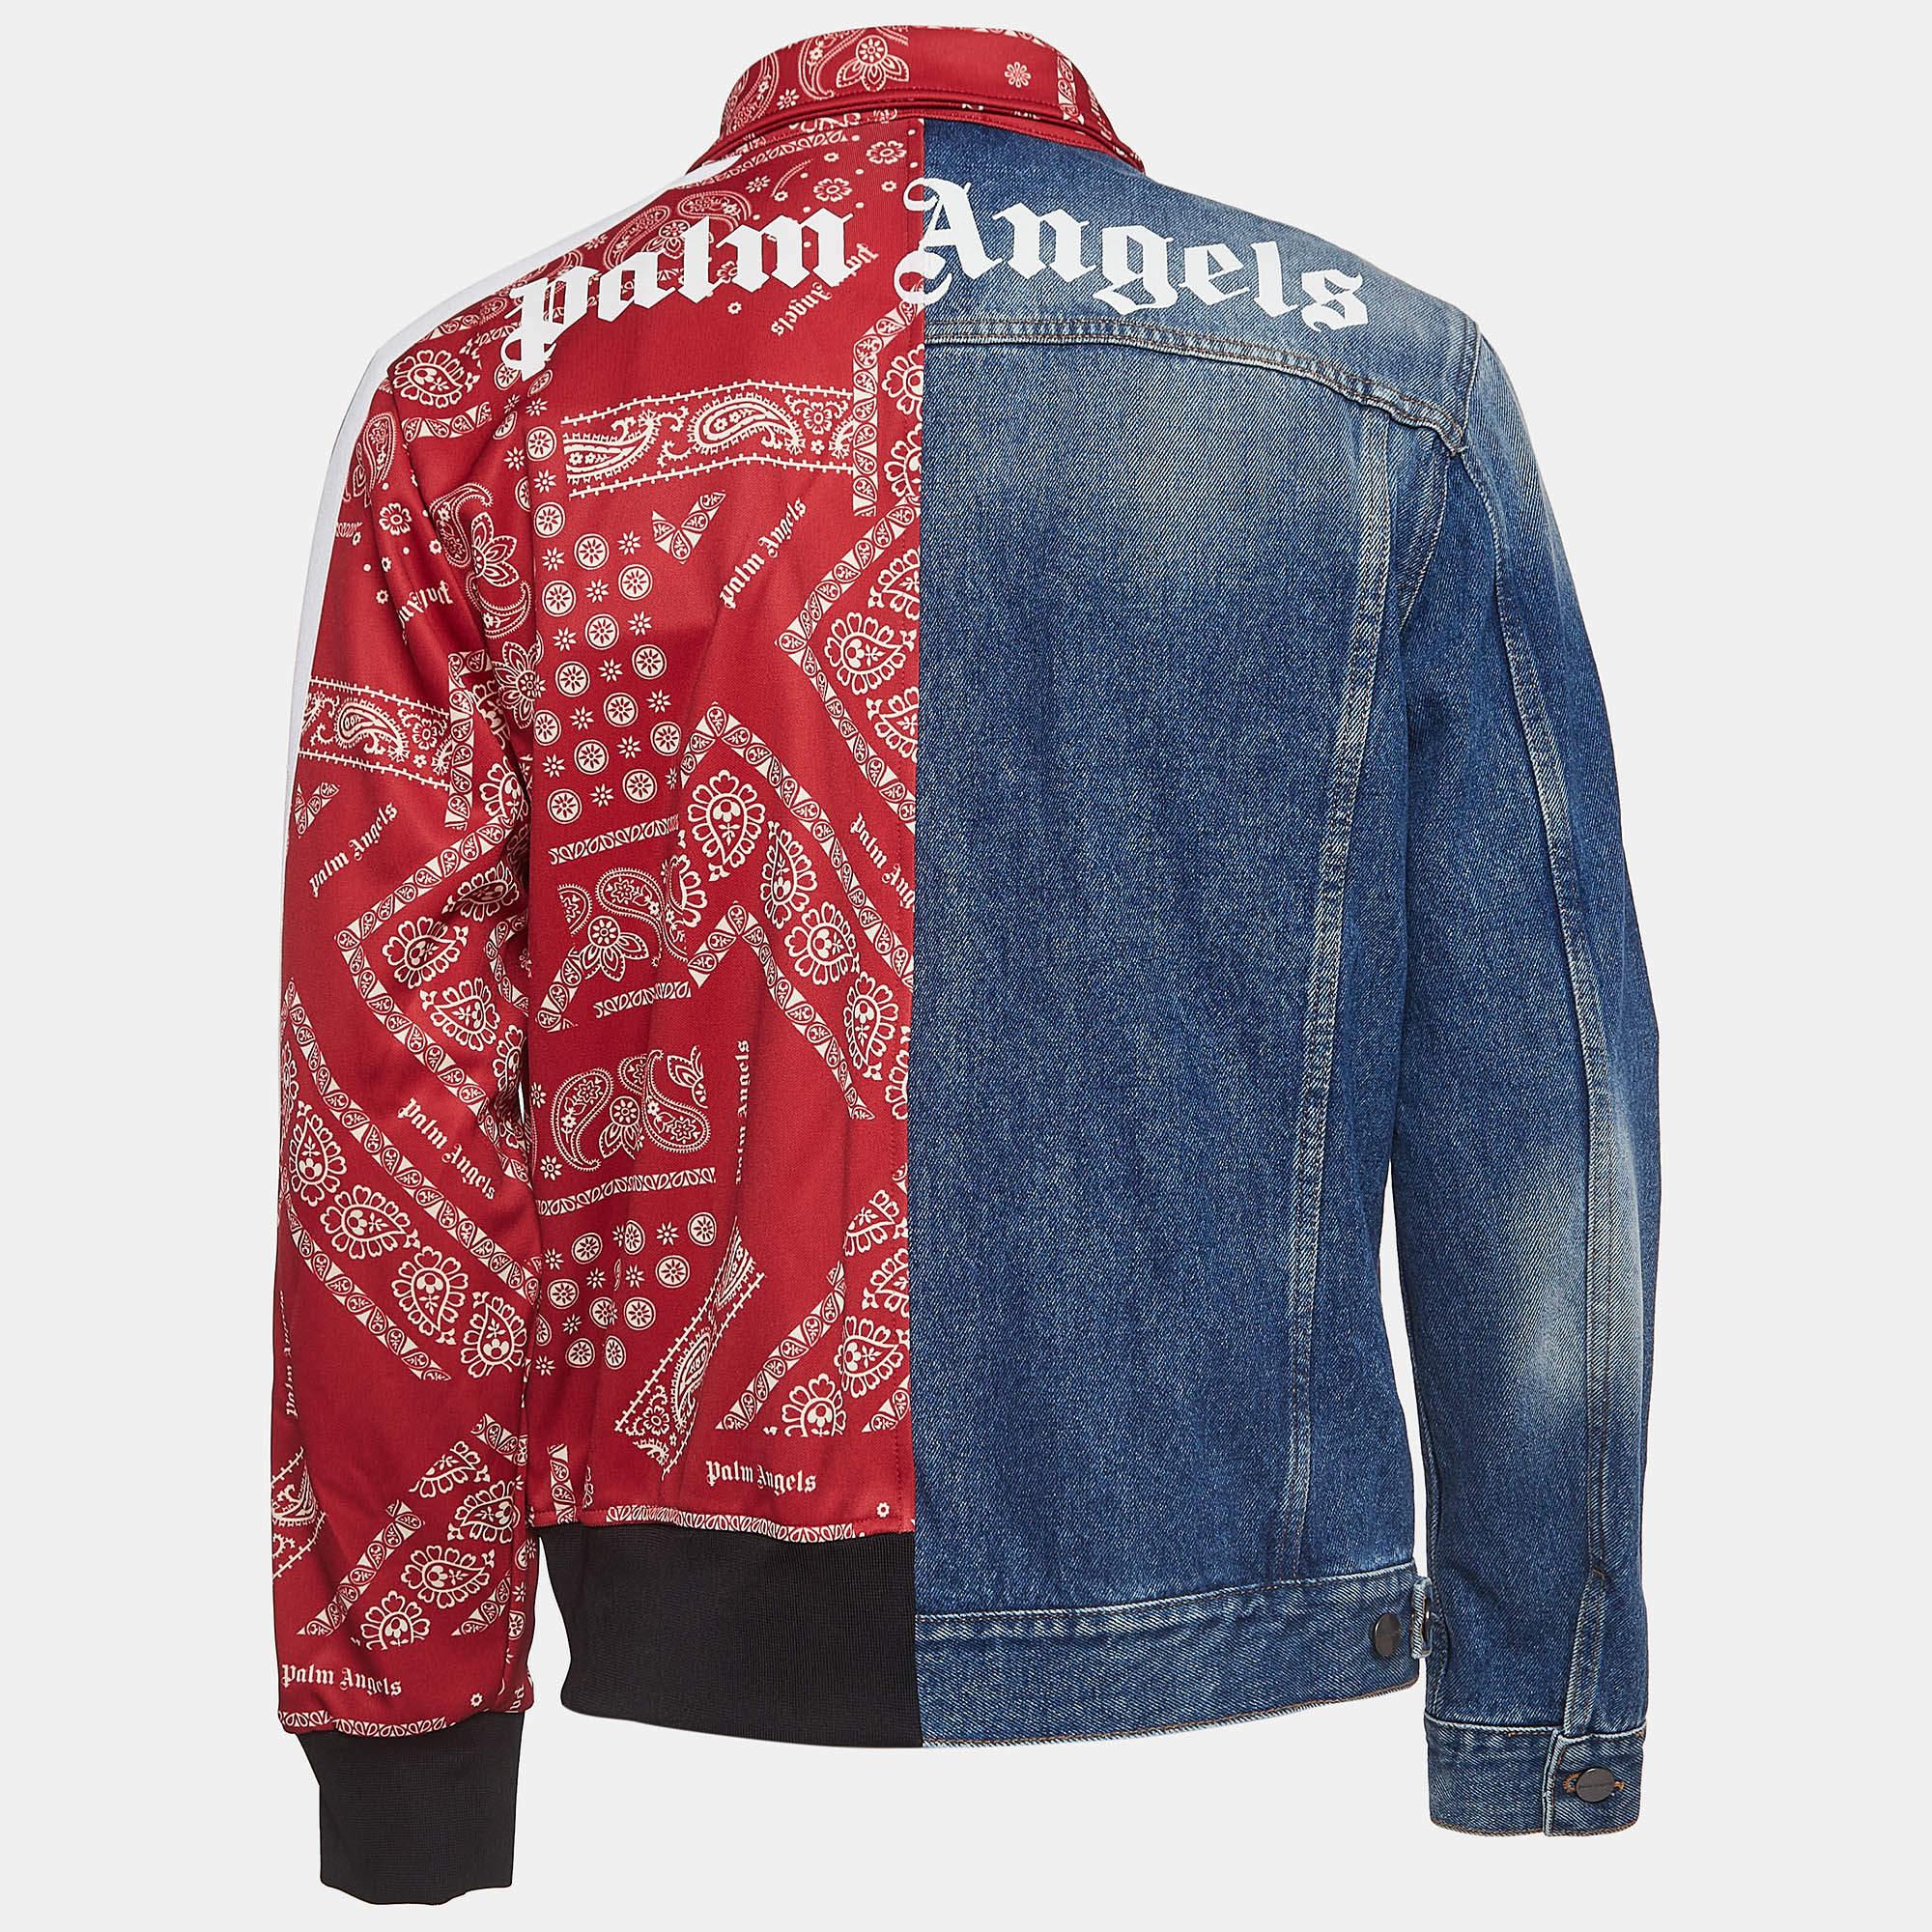 The Palm Angels jacket exudes urban sophistication. Crafted from high-quality denim, it features a striking split bandana print in bold blue and red hues, adding a touch of edgy flair. With its tailored fit and attention to detail, it's a statement